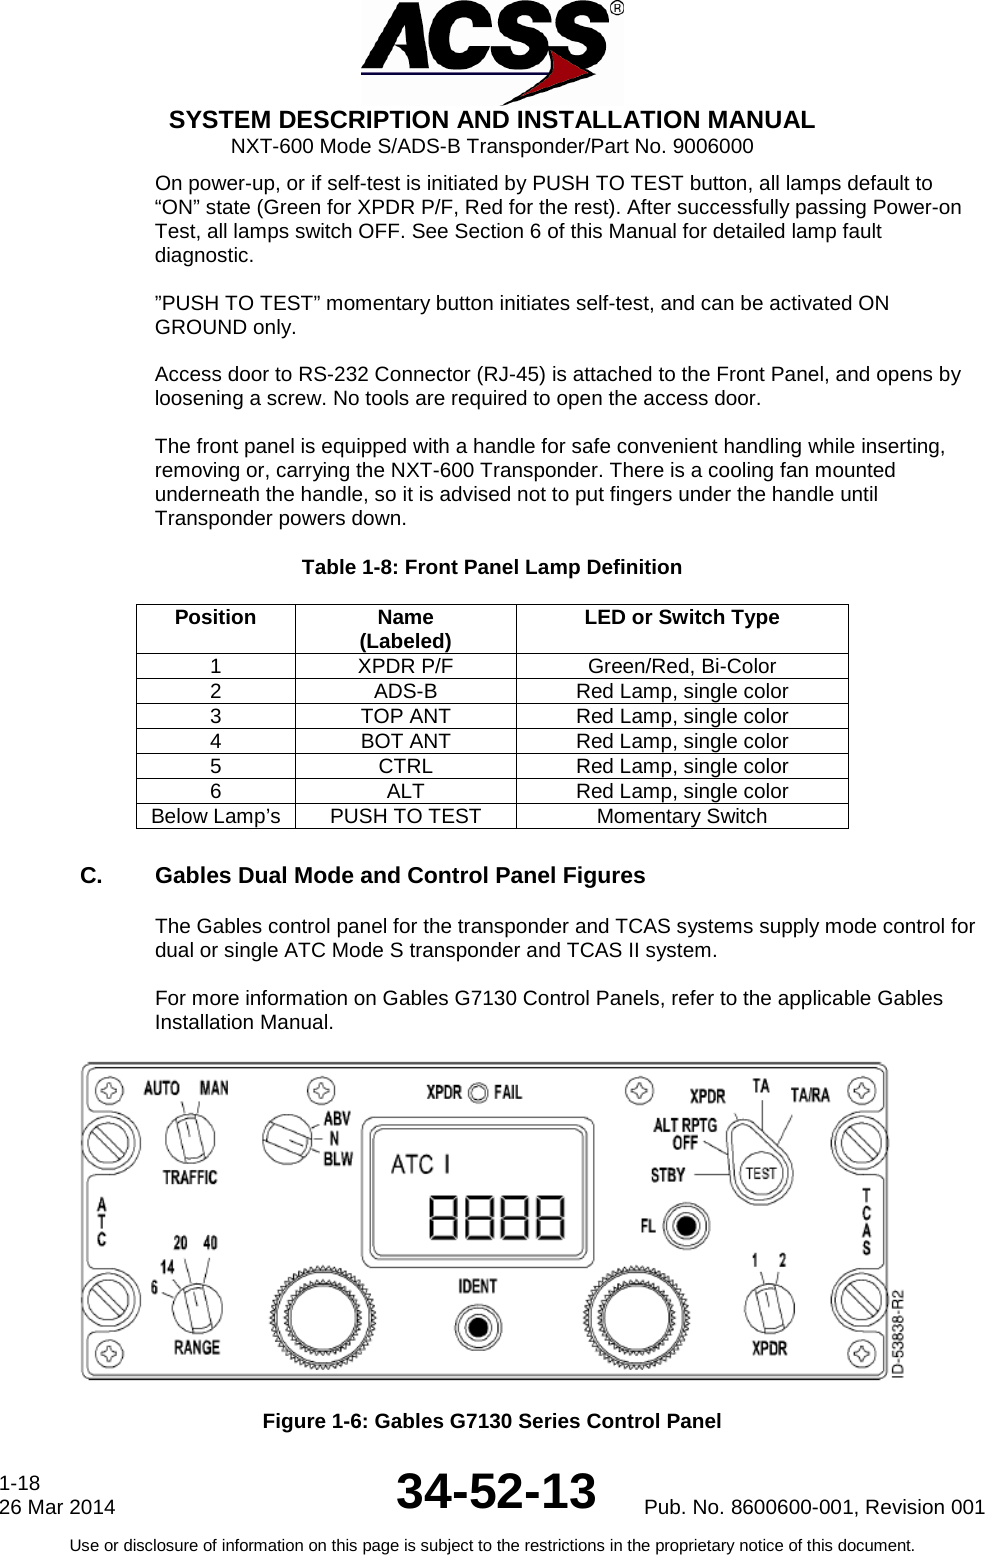  SYSTEM DESCRIPTION AND INSTALLATION MANUAL NXT-600 Mode S/ADS-B Transponder/Part No. 9006000 On power-up, or if self-test is initiated by PUSH TO TEST button, all lamps default to “ON” state (Green for XPDR P/F, Red for the rest). After successfully passing Power-on Test, all lamps switch OFF. See Section 6 of this Manual for detailed lamp fault diagnostic.   ”PUSH TO TEST” momentary button initiates self-test, and can be activated ON GROUND only.   Access door to RS-232 Connector (RJ-45) is attached to the Front Panel, and opens by loosening a screw. No tools are required to open the access door.  The front panel is equipped with a handle for safe convenient handling while inserting, removing or, carrying the NXT-600 Transponder. There is a cooling fan mounted underneath the handle, so it is advised not to put fingers under the handle until Transponder powers down. Table 1-8: Front Panel Lamp Definition Position  Name (Labeled) LED or Switch Type 1 XPDR P/F Green/Red, Bi-Color 2 ADS-B Red Lamp, single color 3 TOP ANT Red Lamp, single color 4 BOT ANT Red Lamp, single color 5 CTRL Red Lamp, single color 6 ALT Red Lamp, single color Below Lamp’s PUSH TO TEST Momentary Switch C. Gables Dual Mode and Control Panel Figures The Gables control panel for the transponder and TCAS systems supply mode control for dual or single ATC Mode S transponder and TCAS II system.  For more information on Gables G7130 Control Panels, refer to the applicable Gables Installation Manual.    Figure 1-6: Gables G7130 Series Control Panel 1-18 26 Mar 2014 34-52-13 Pub. No. 8600600-001, Revision 001 Use or disclosure of information on this page is subject to the restrictions in the proprietary notice of this document.  